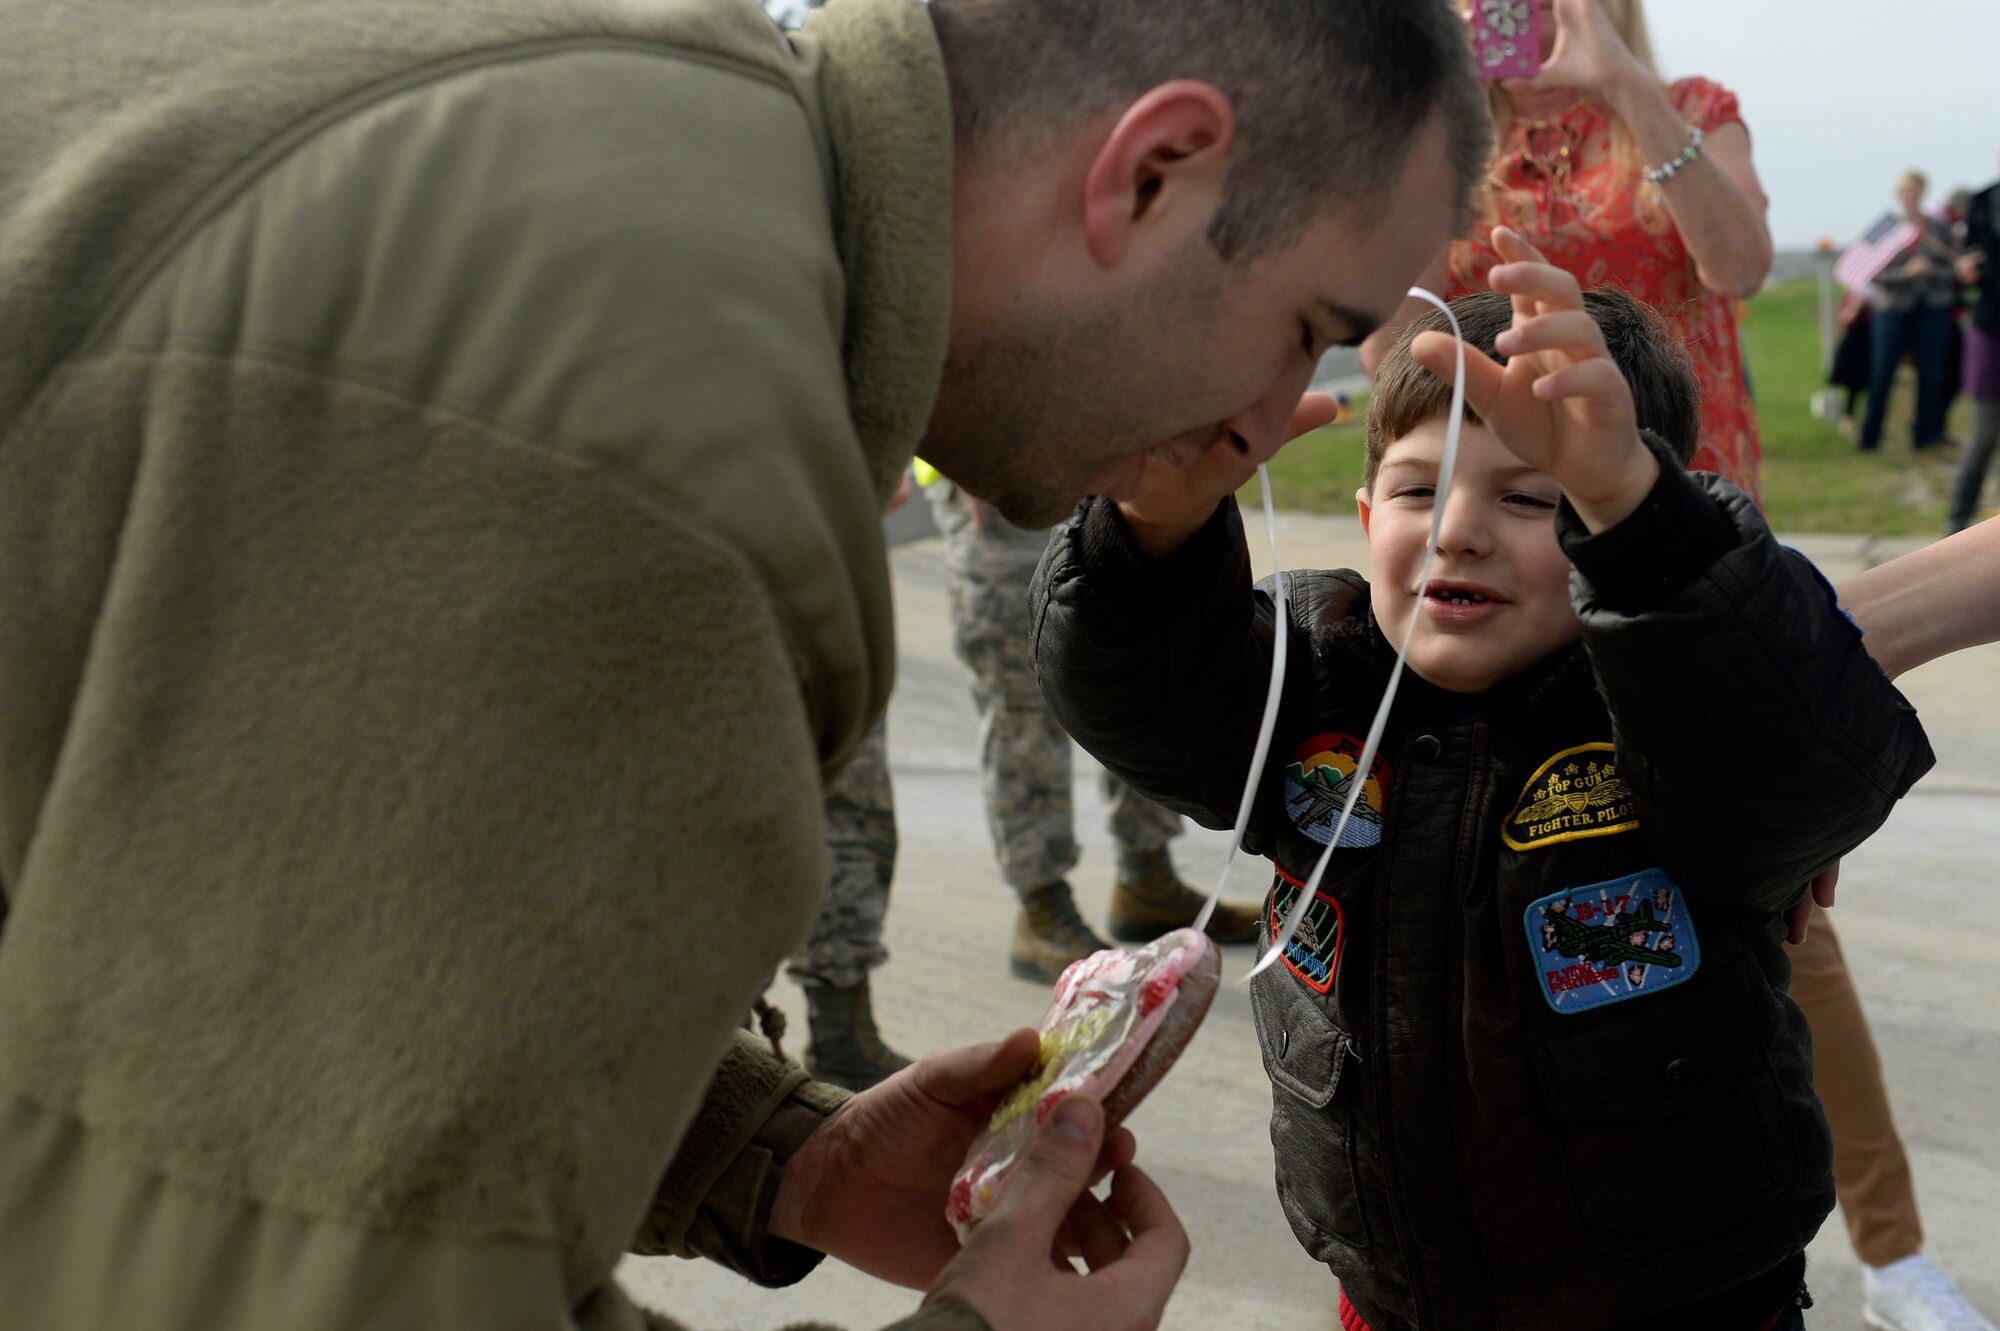 SPANGDAHLEM AIR BASE, Germany—Senior Airman Sean Capehart, a 52nd Equipment Maintenance Squadron aircraft structural maintenance journeyman, receives a gift from his son after returning home from a deployment Sept. 21, 2013, at Spangdahlem Air Base, Germany. Capehart and members of the 480th Fighter Squadron and supporting agencies deployed to support Operation Enduring Freedom. (U.S. Air Force photo by Senior Airman Rusty Frank/Released)